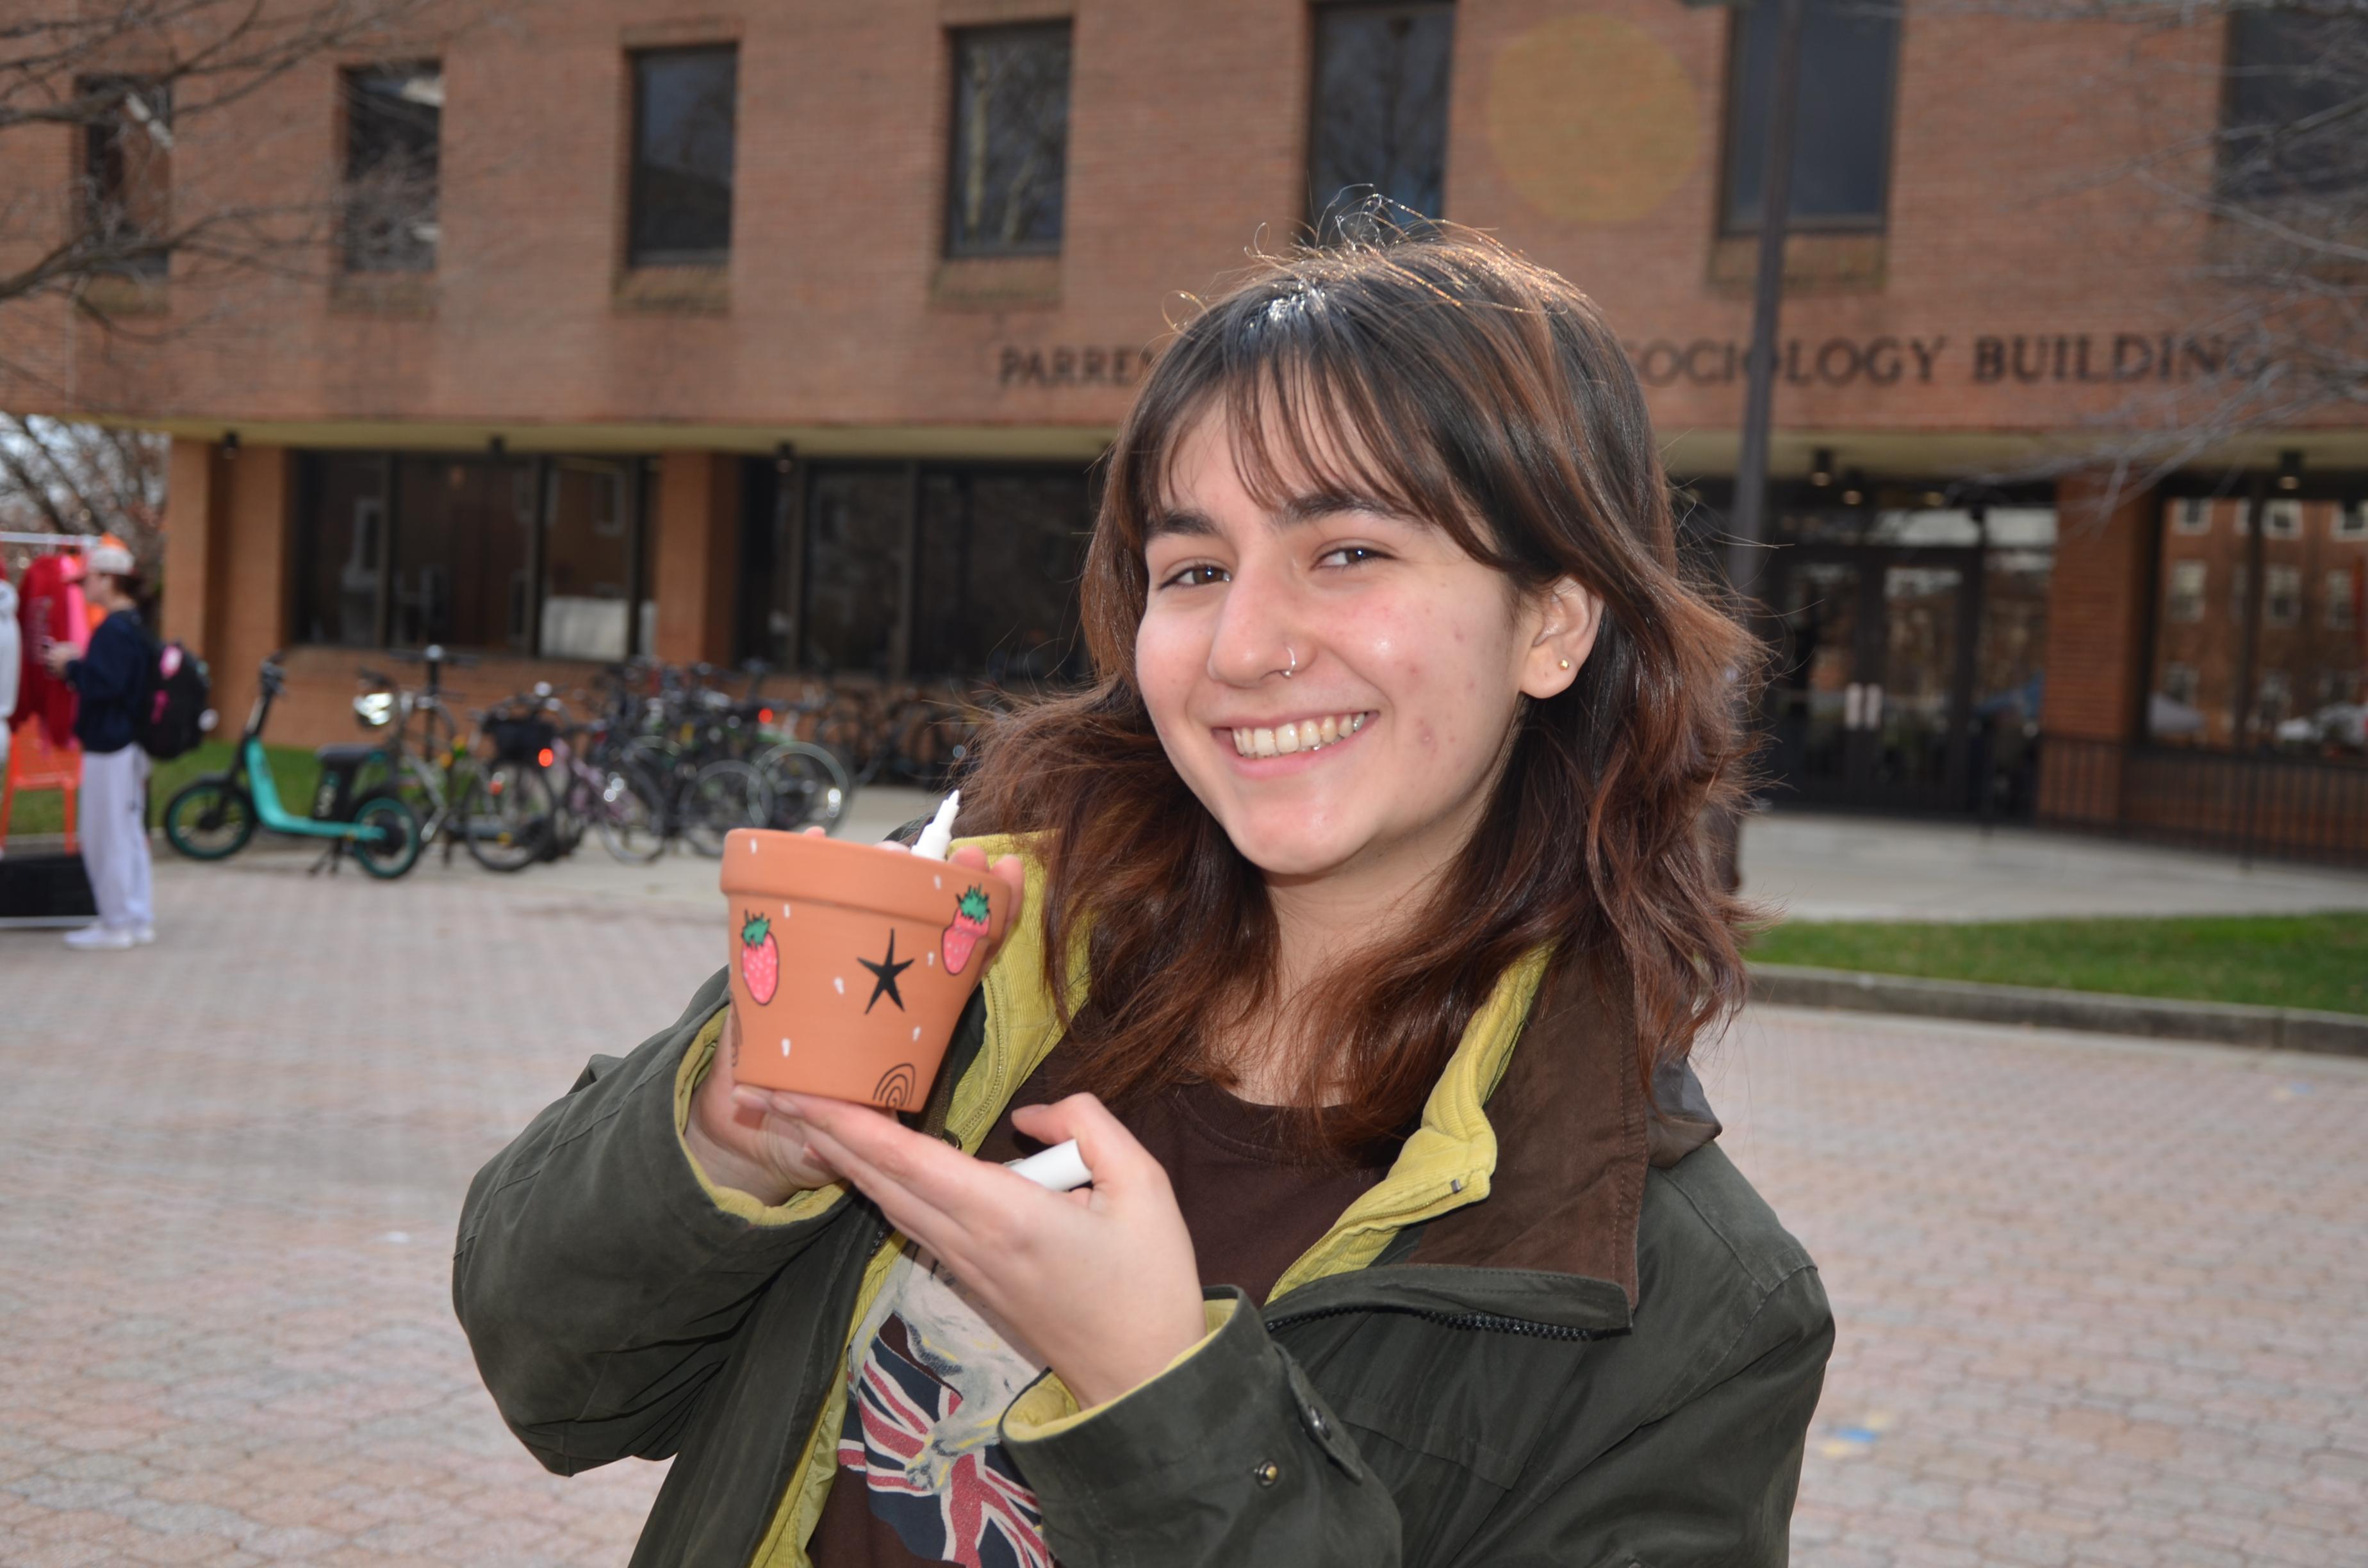 student posing with a pot they decorated that has strawberries and stars on it